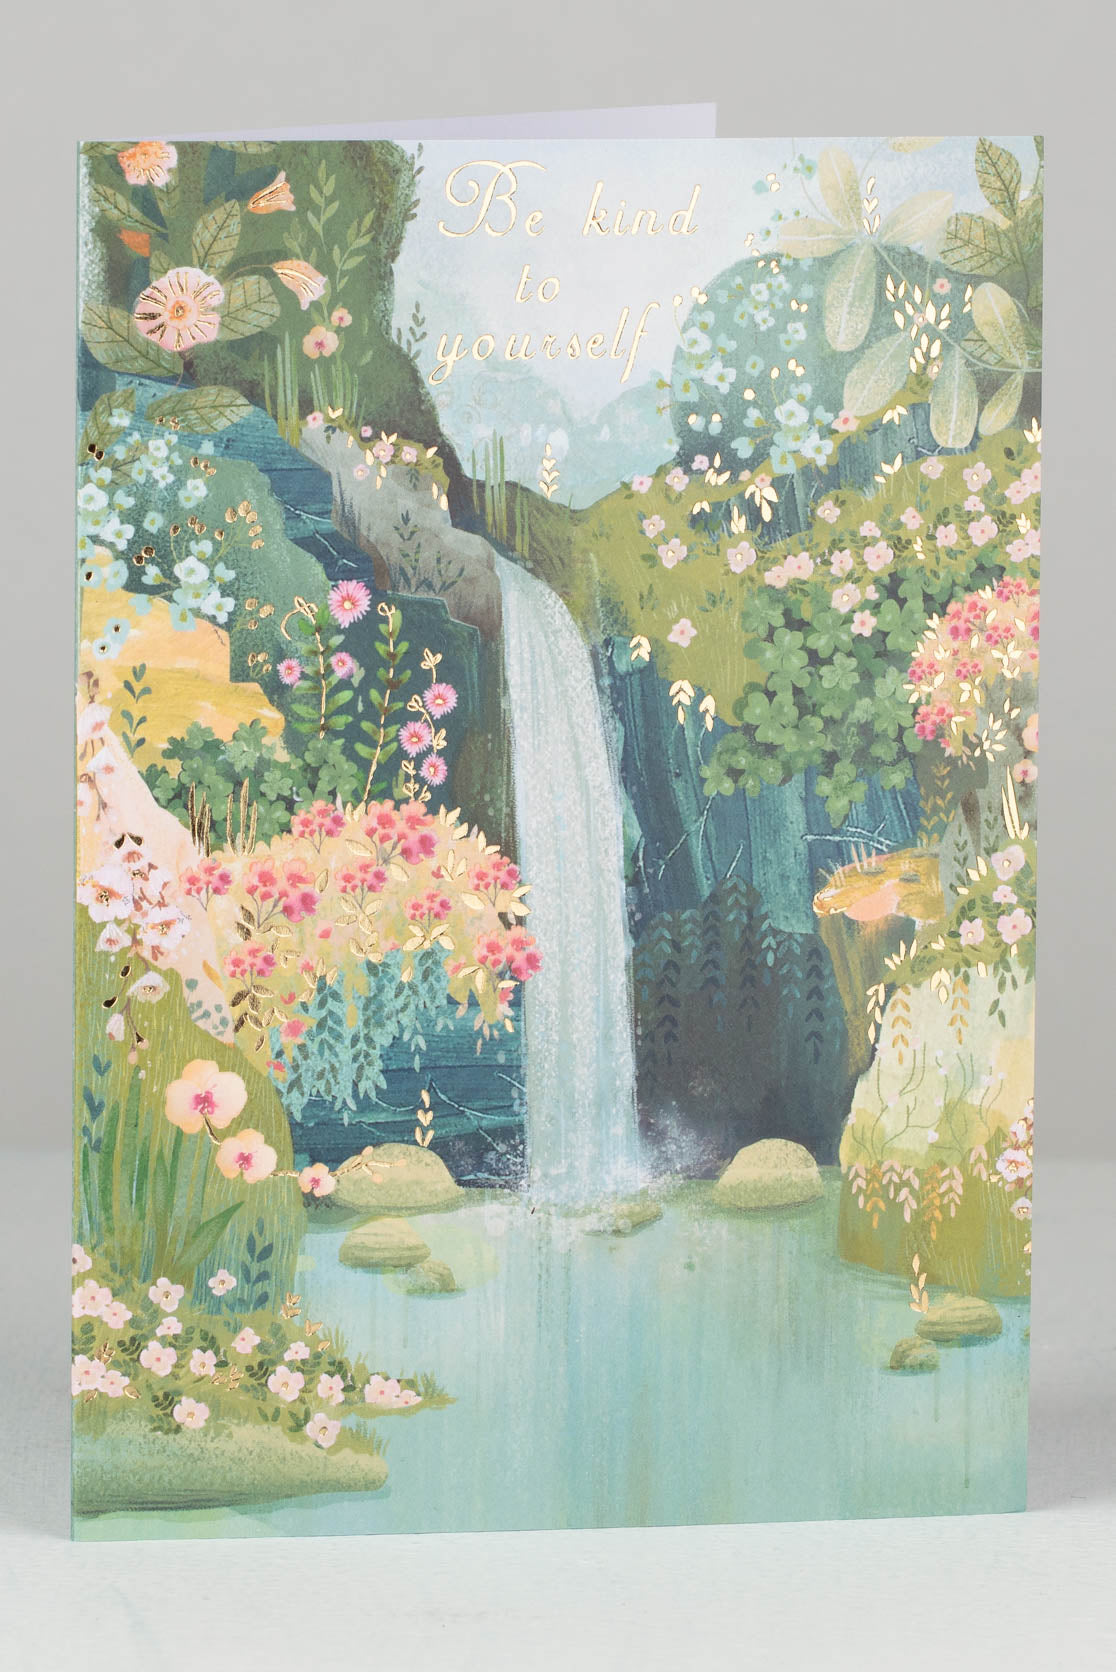 Greetings card with waterfall and flowers on front cover